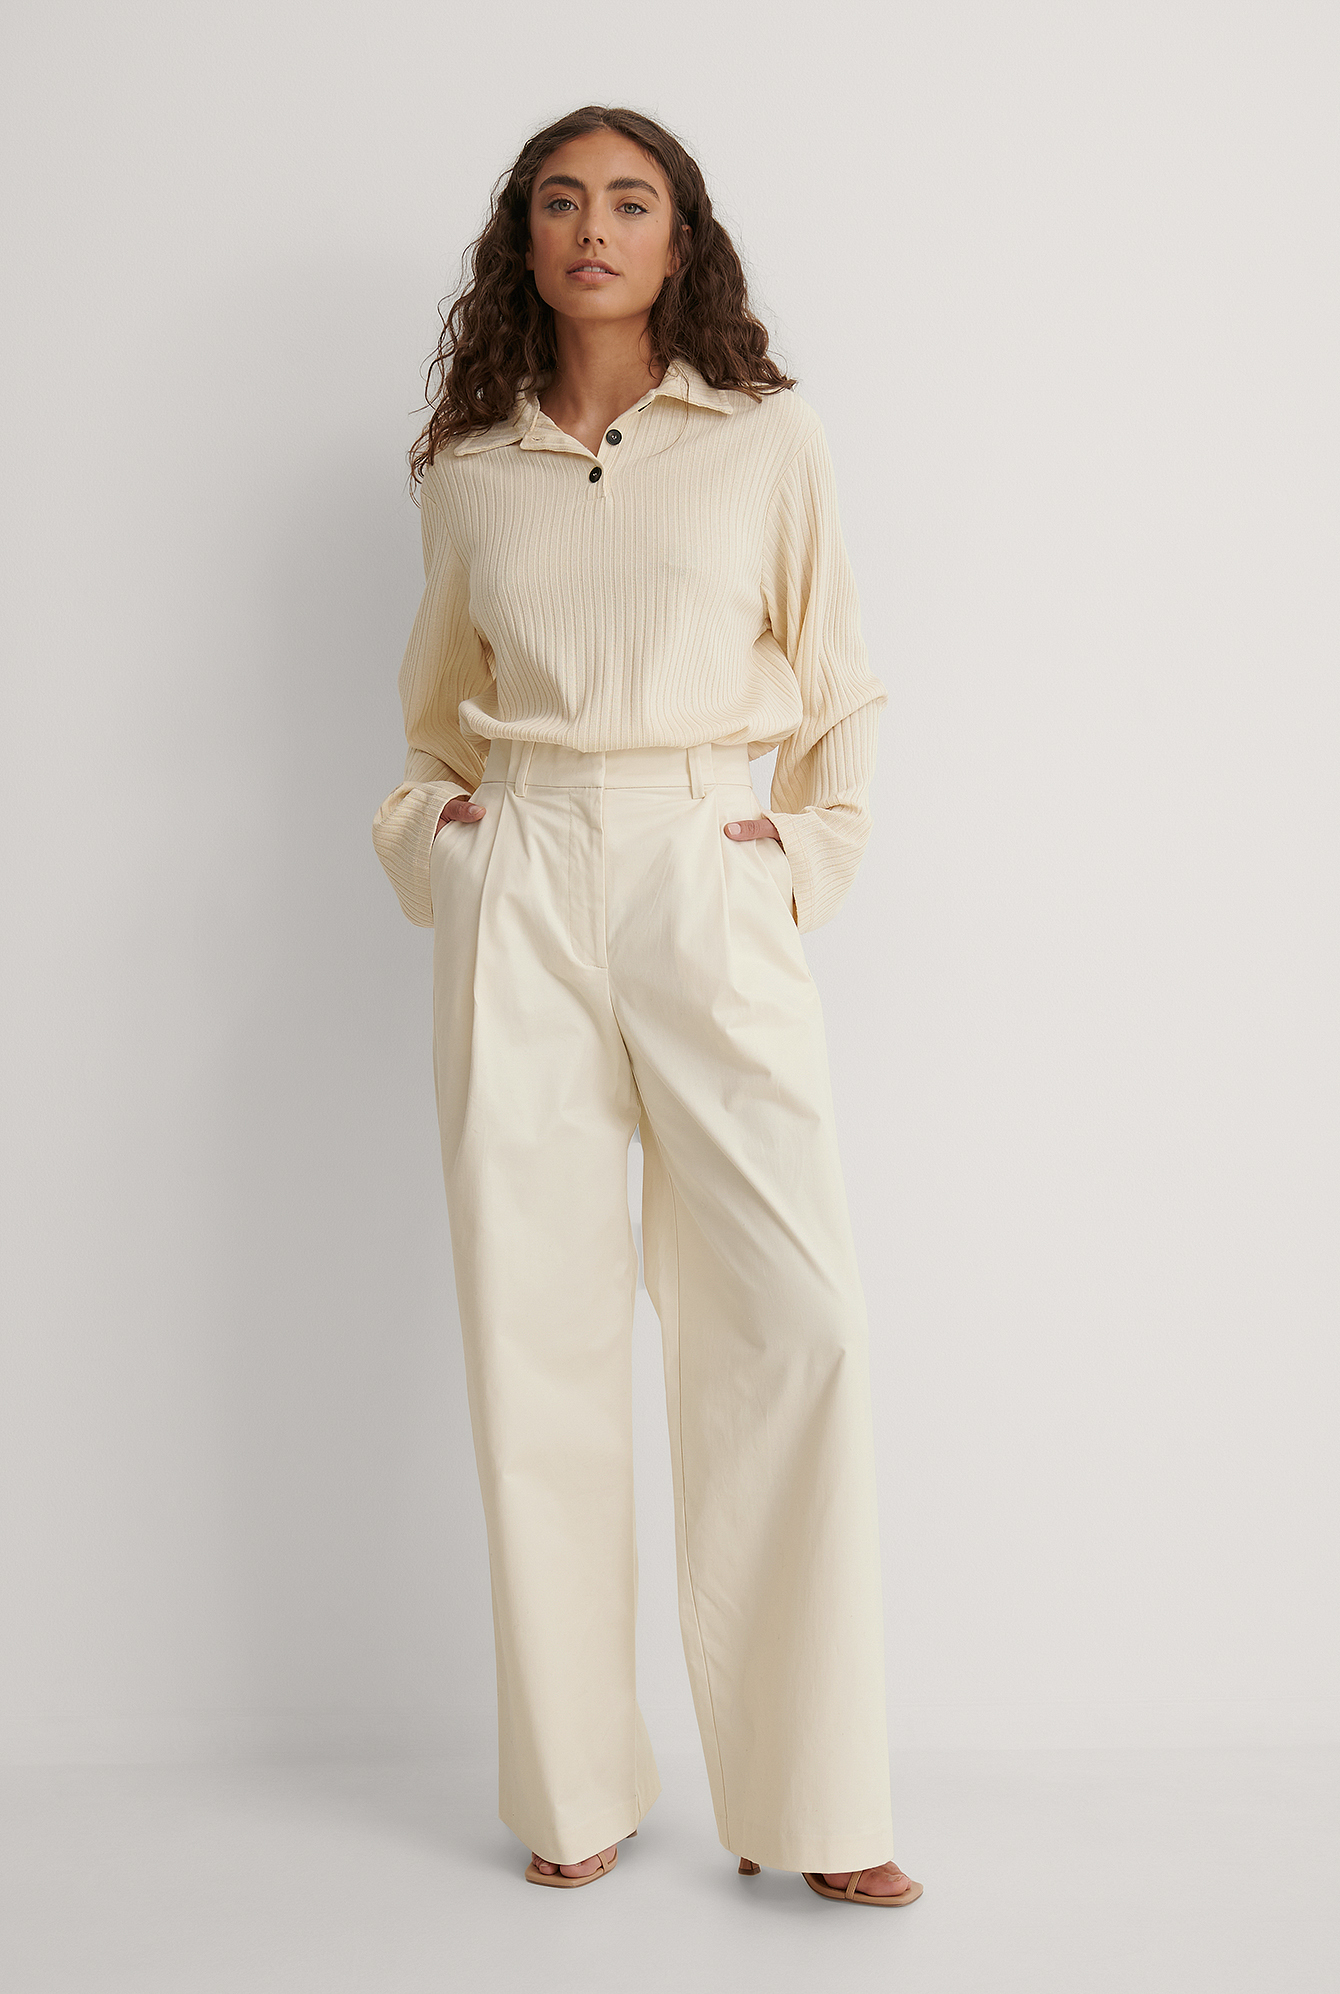 Wide Twill Cotton Pants Outfit